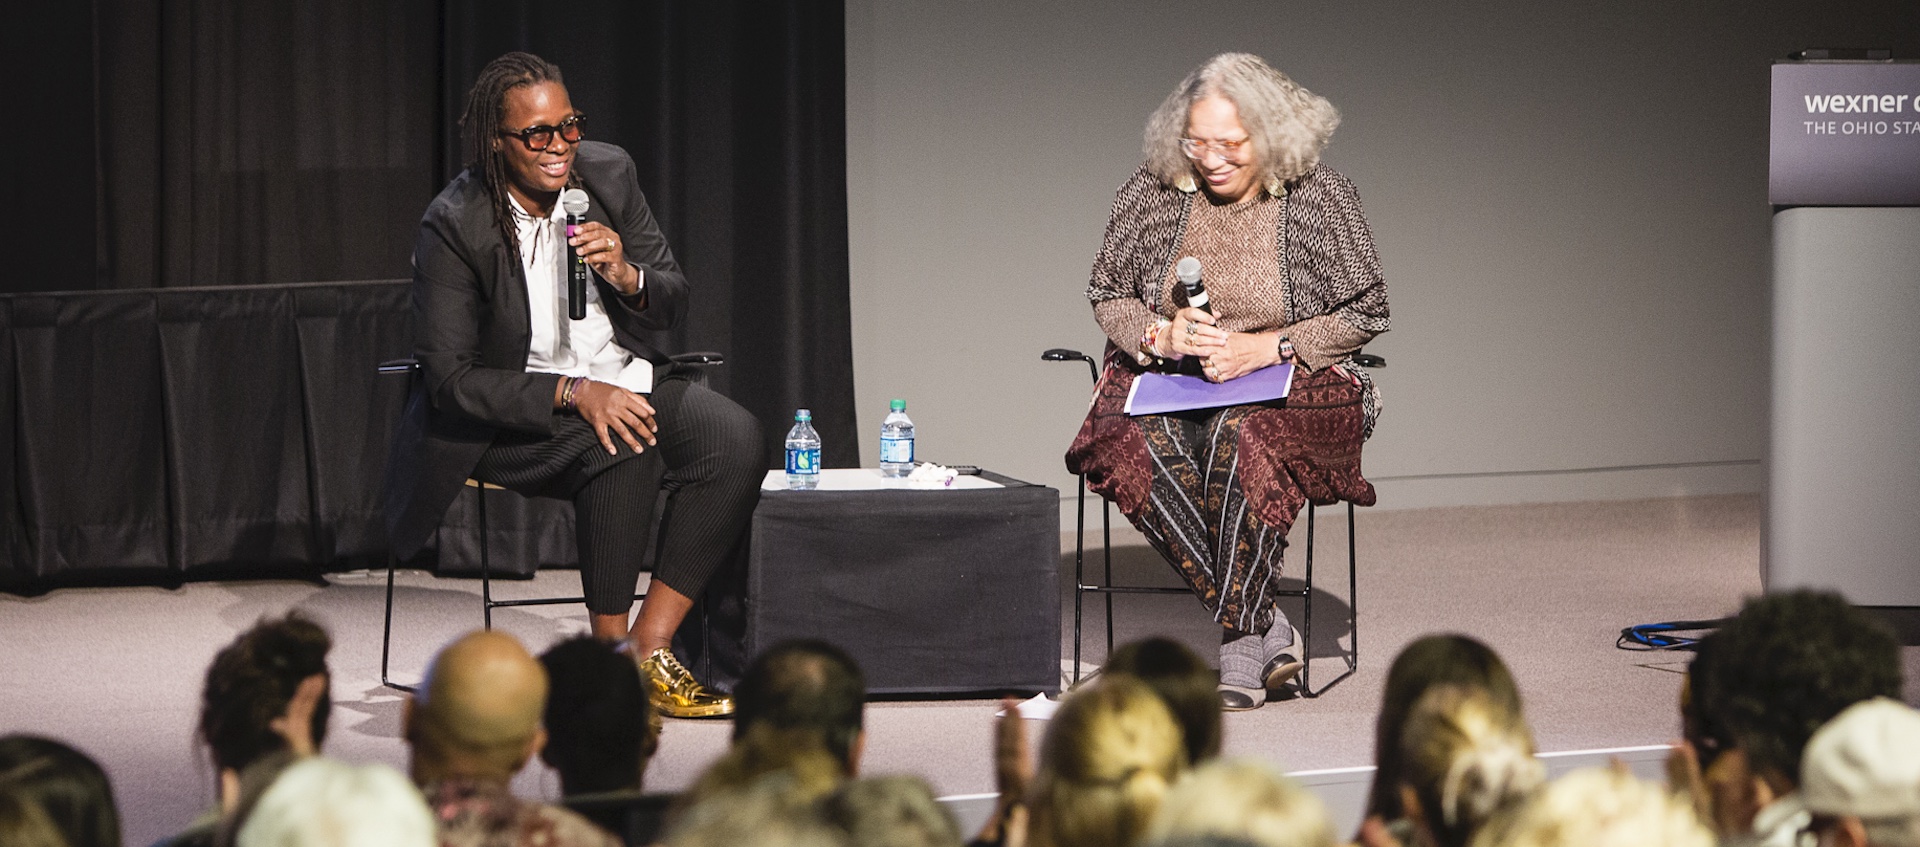 Mickalene Thomas talks with Beverly Guy-Sheftall at the Wexner Center for the Arts